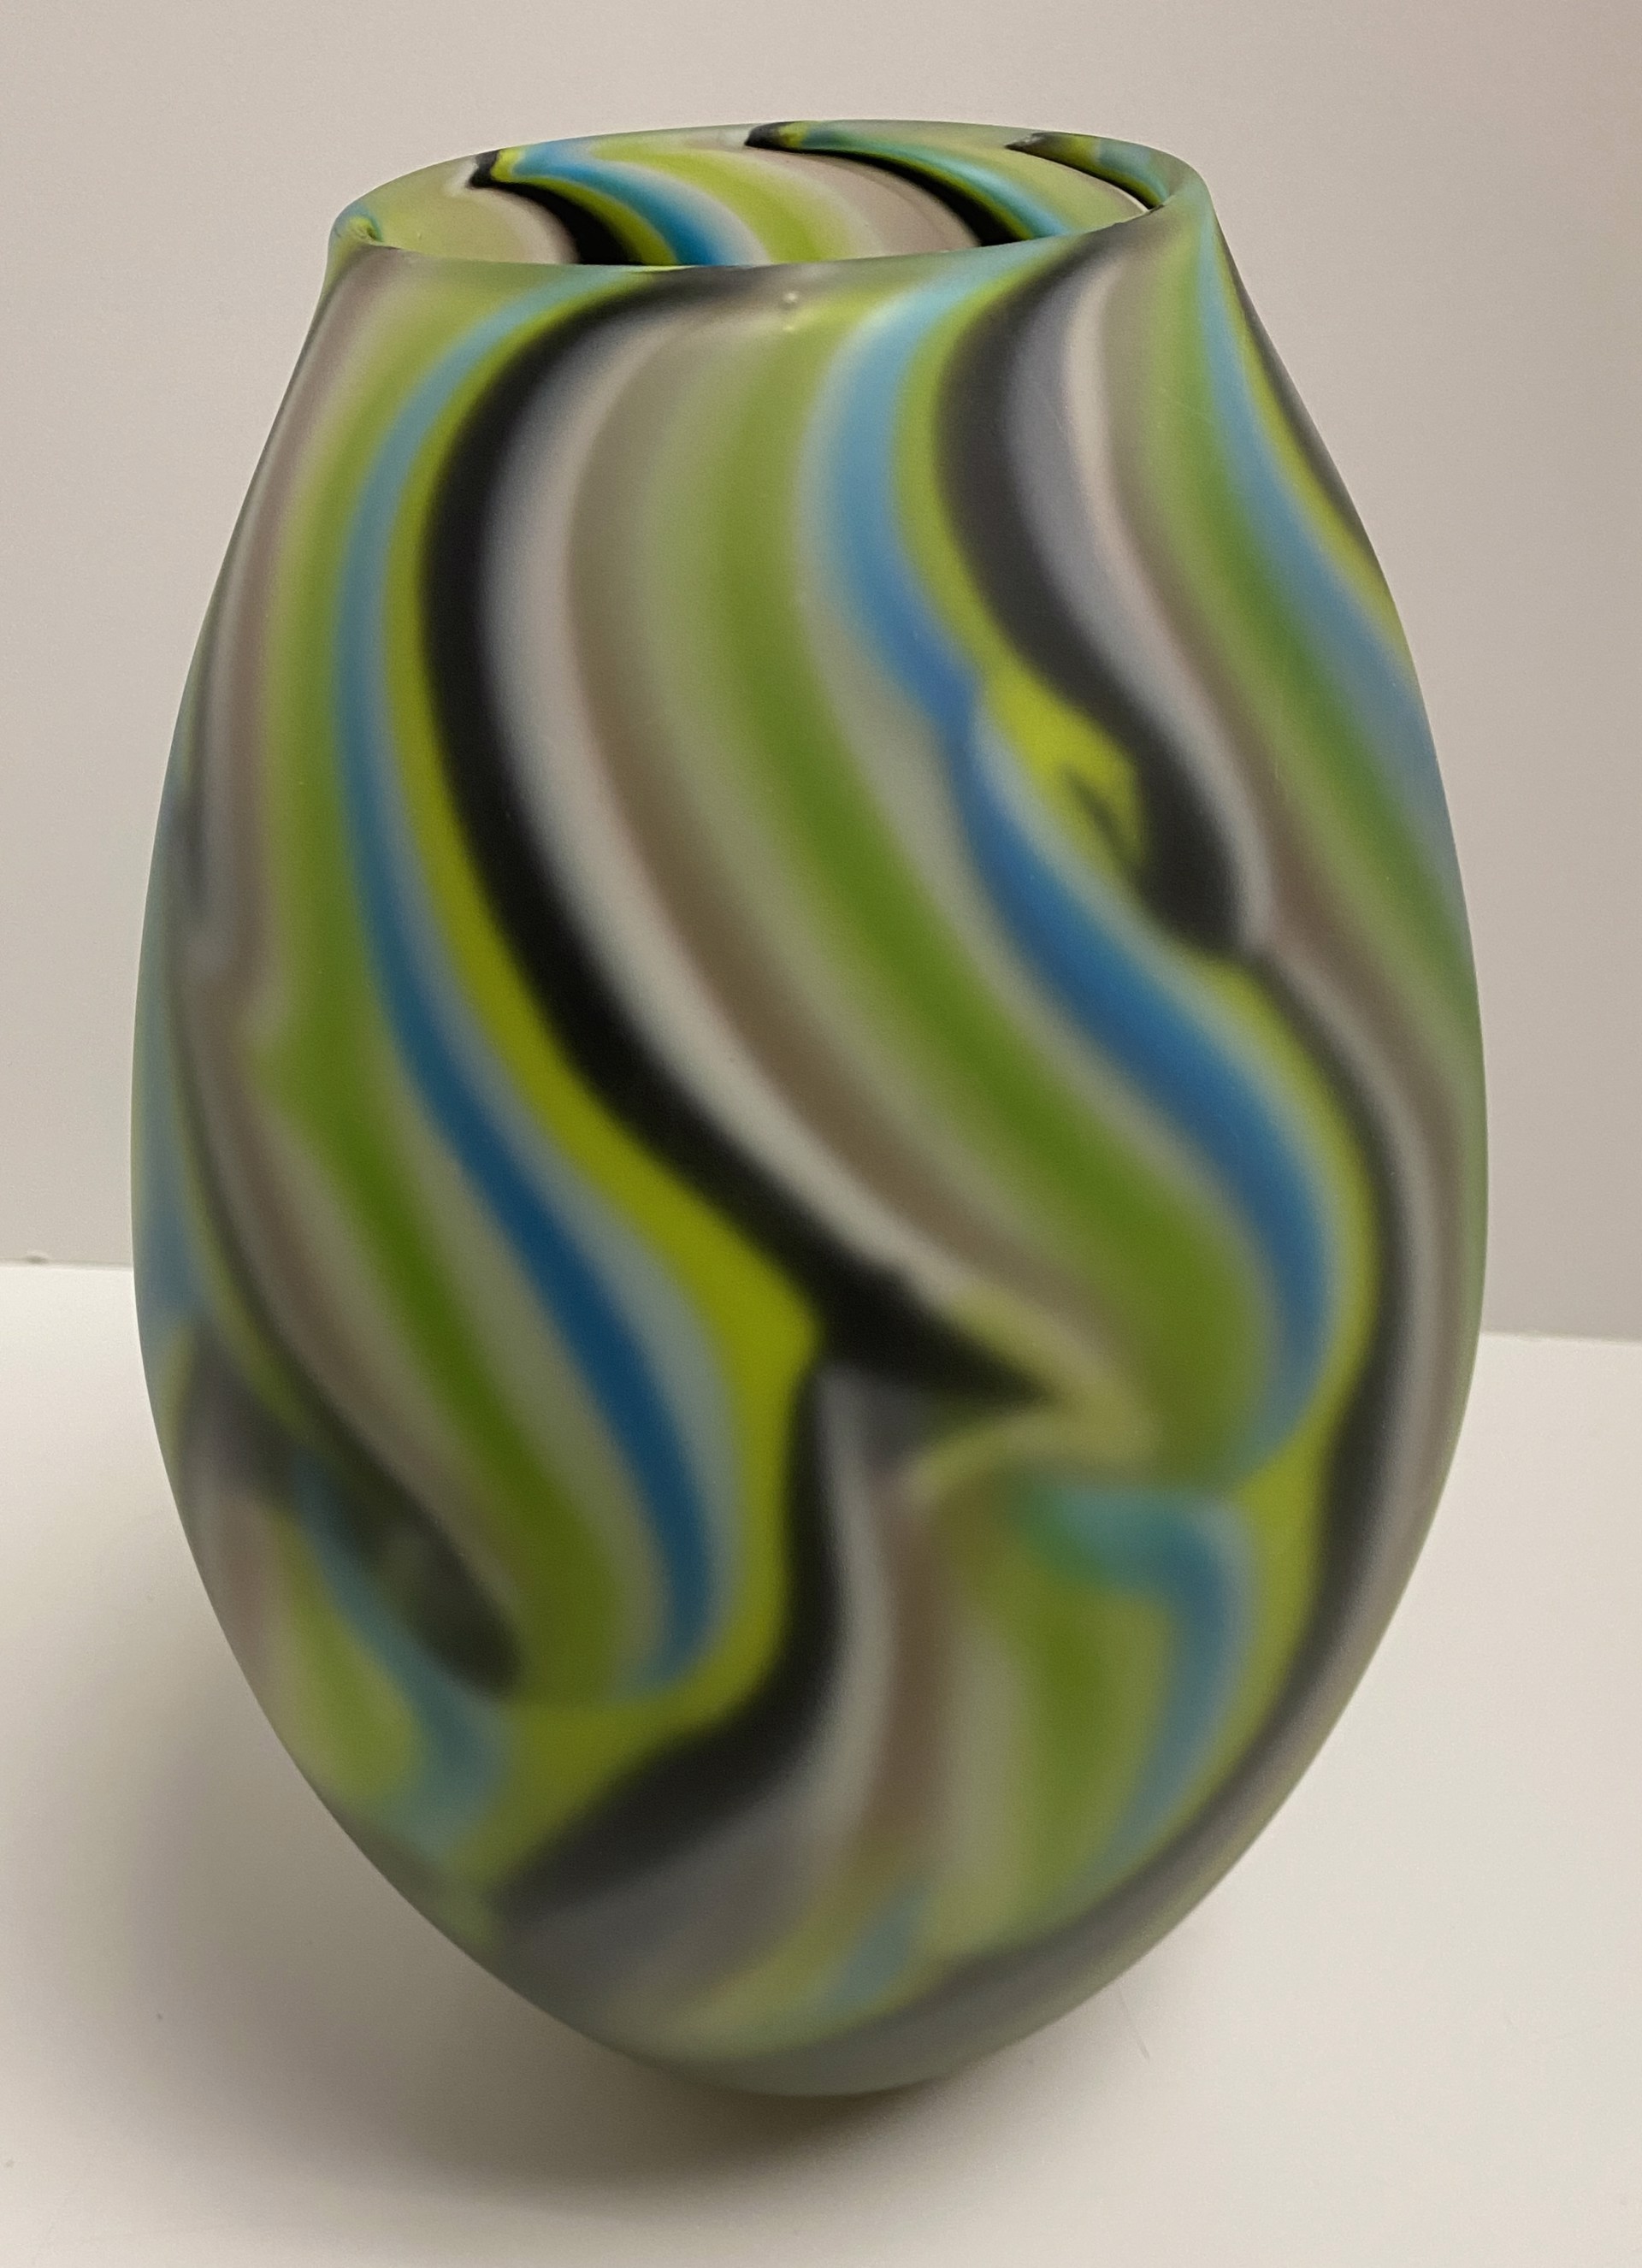 Smoke Turquoise,Green, Black Olive shape by Rene Culler